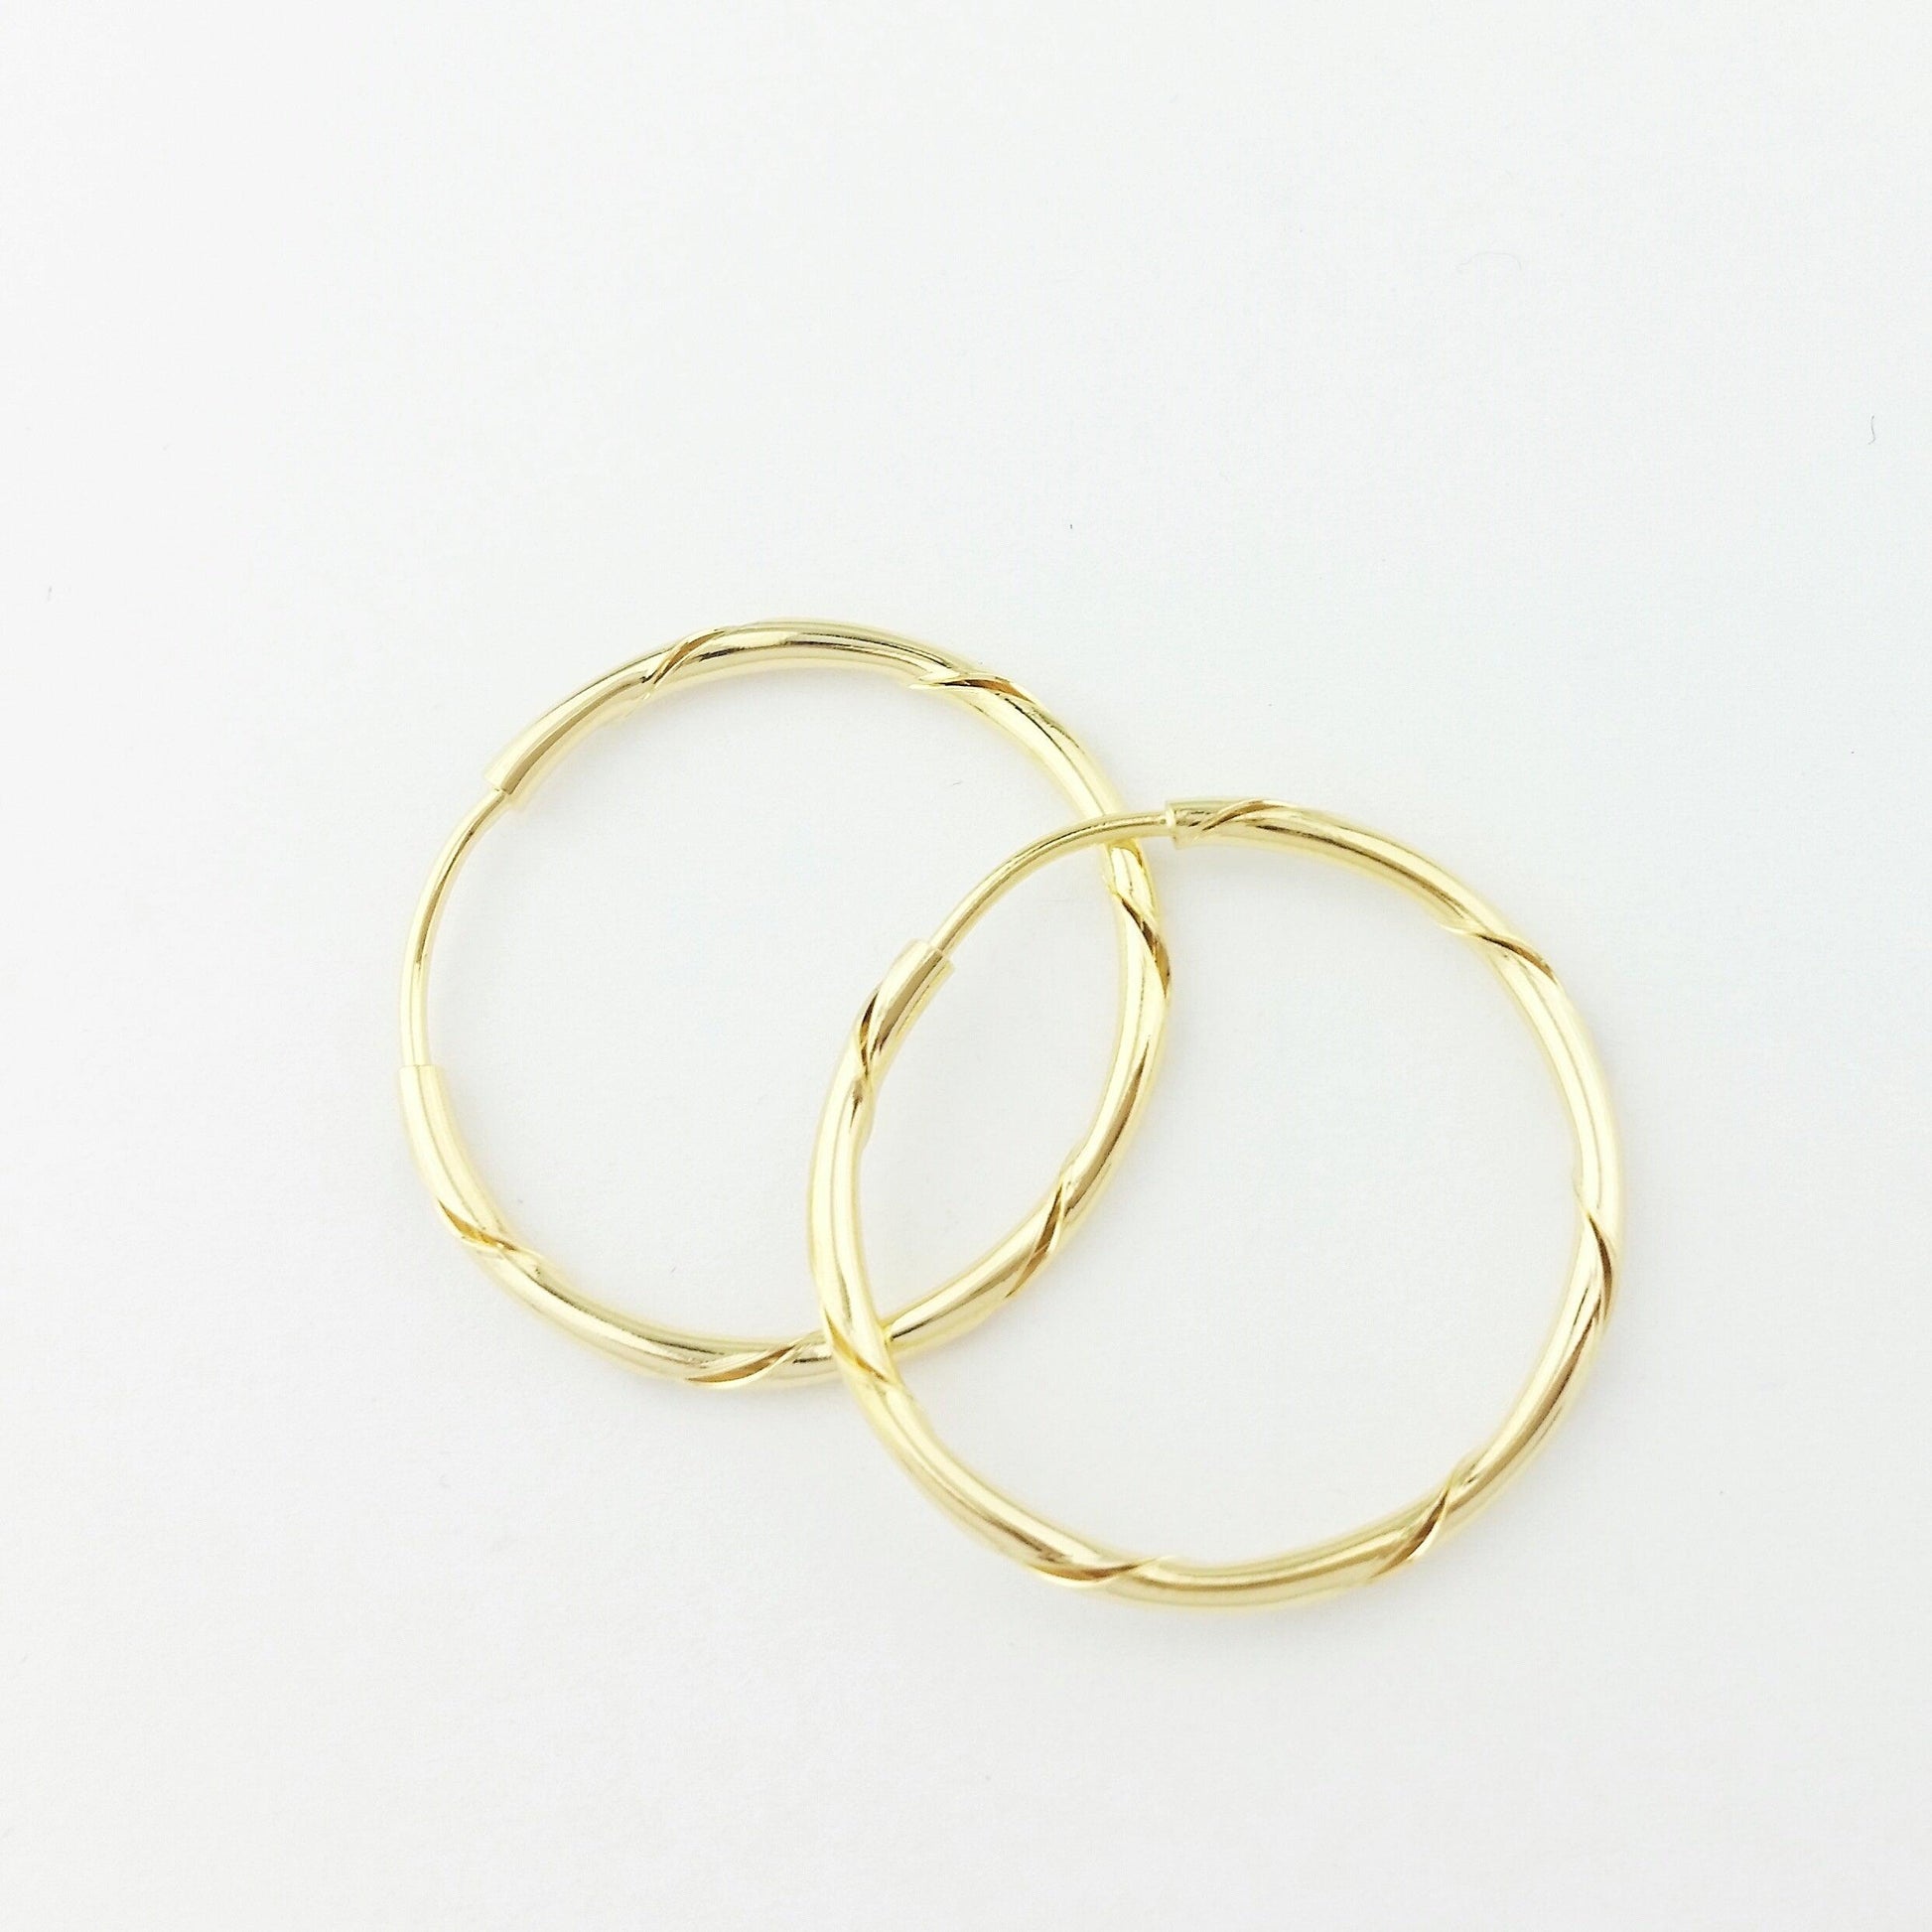 25mm Tube Hoops - Rowe Boutique